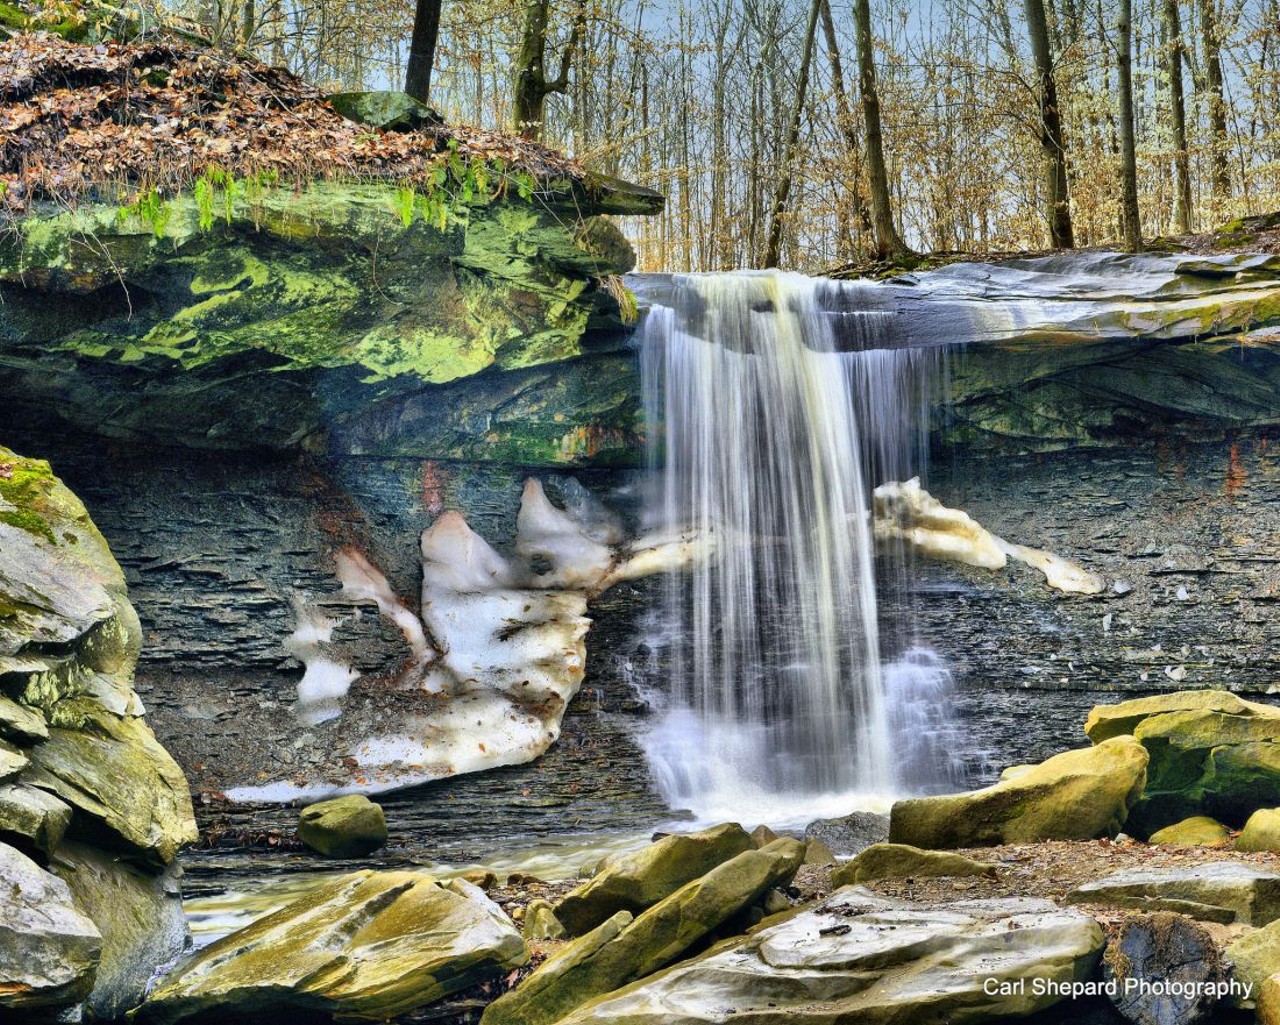  Blue Hen Falls
Boston Mills Rd., Brecksville
These serene falls promise a peaceful experience at one of the so-called &#147;prettiest waterfalls in Cuyahoga Valley National Park.&#148; Blue Hen Falls is about a 35 minute drive from Cleveland.
Photo via Carl Shepard/flickr